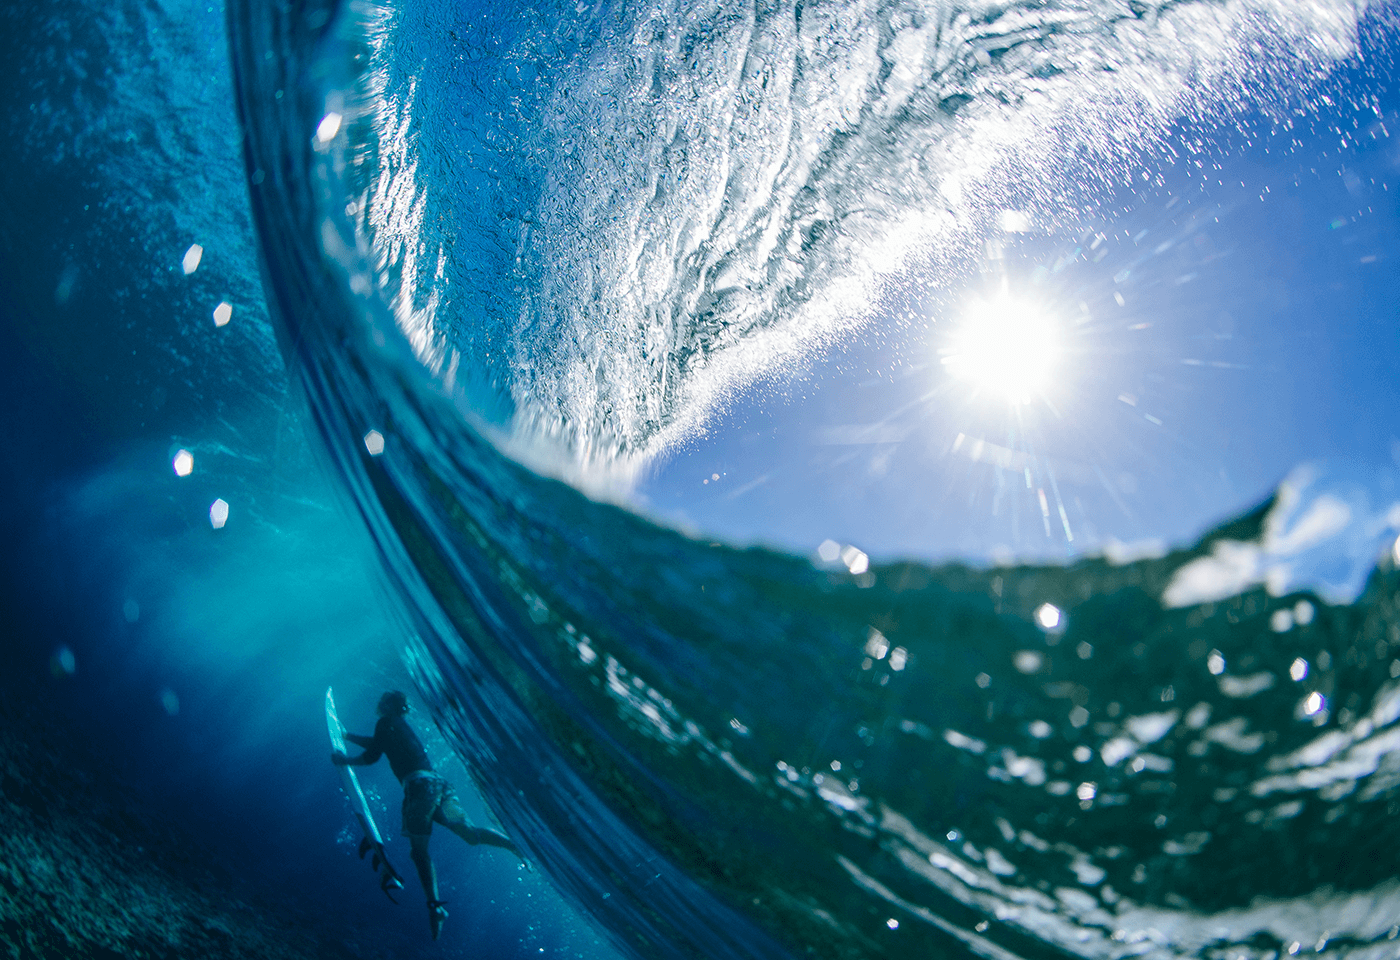 Taken at the Tahiti Pro Teahupo’o - WSL Championship Tour 2019 by Matt Dunbar. It was a finalist in the 2019 Surf photographer of the Year awards. 